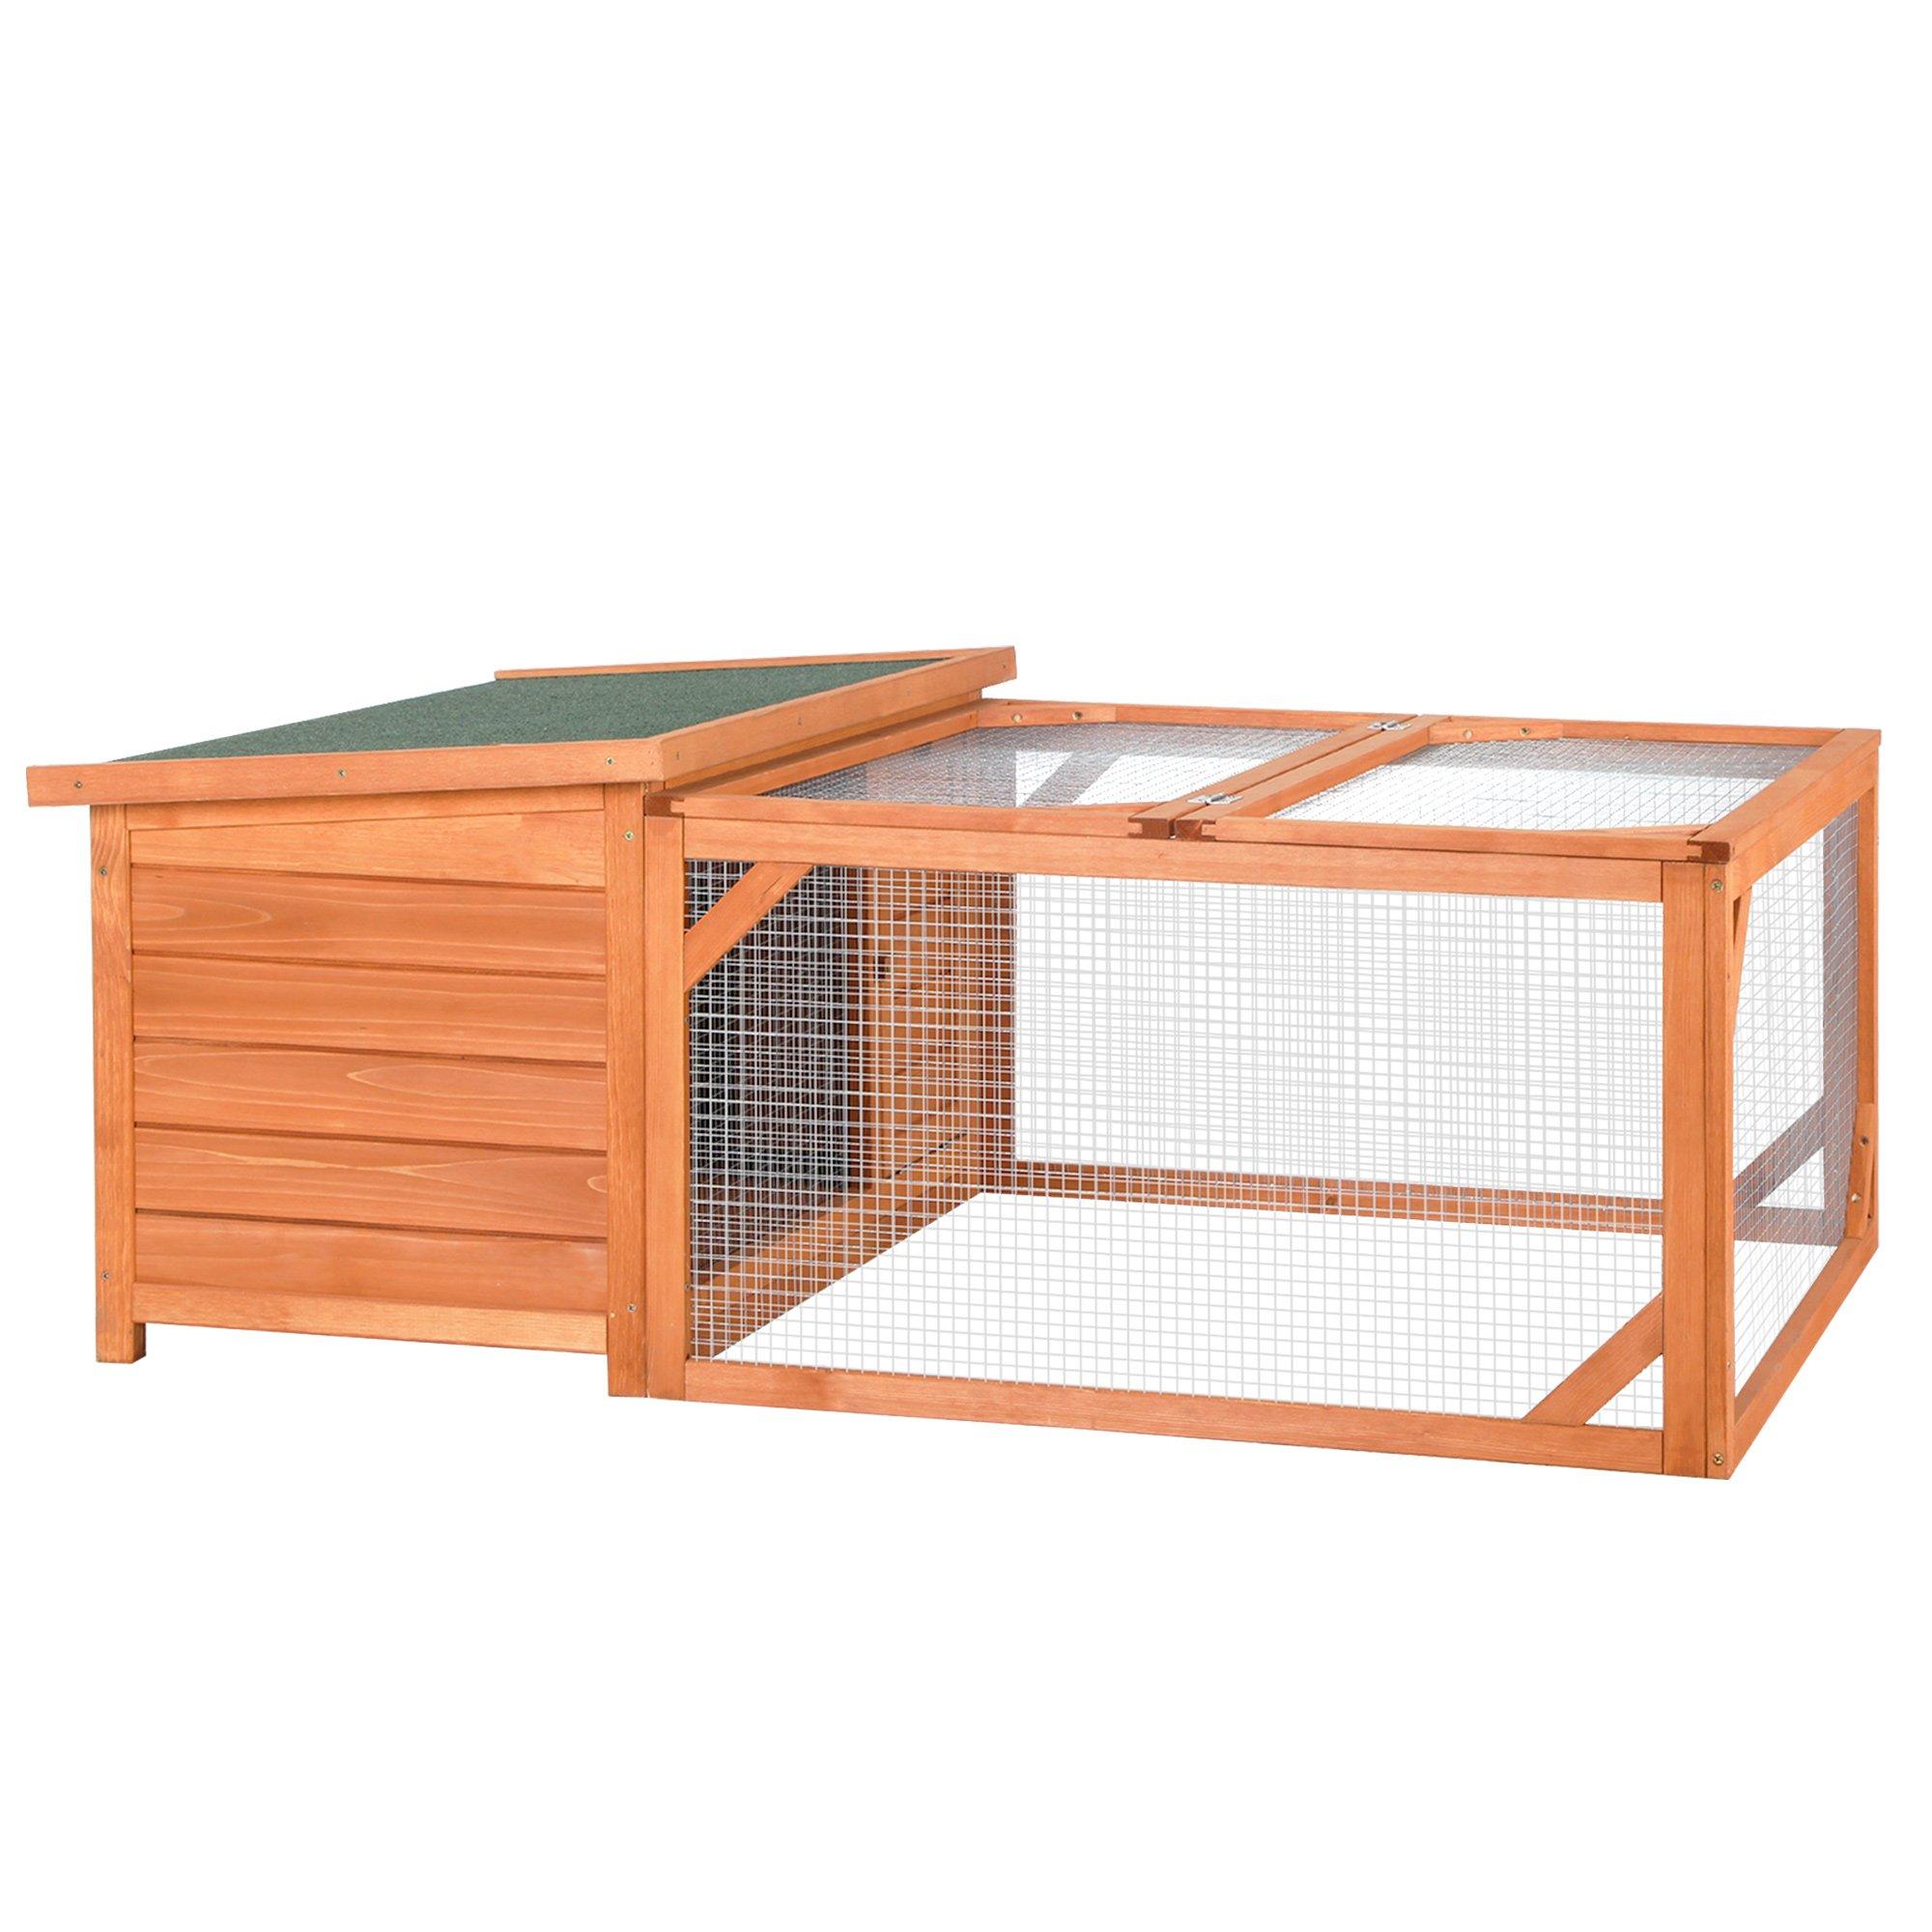 Wooden Rabbit Hutch with Run Small Animal Guinea Pig House